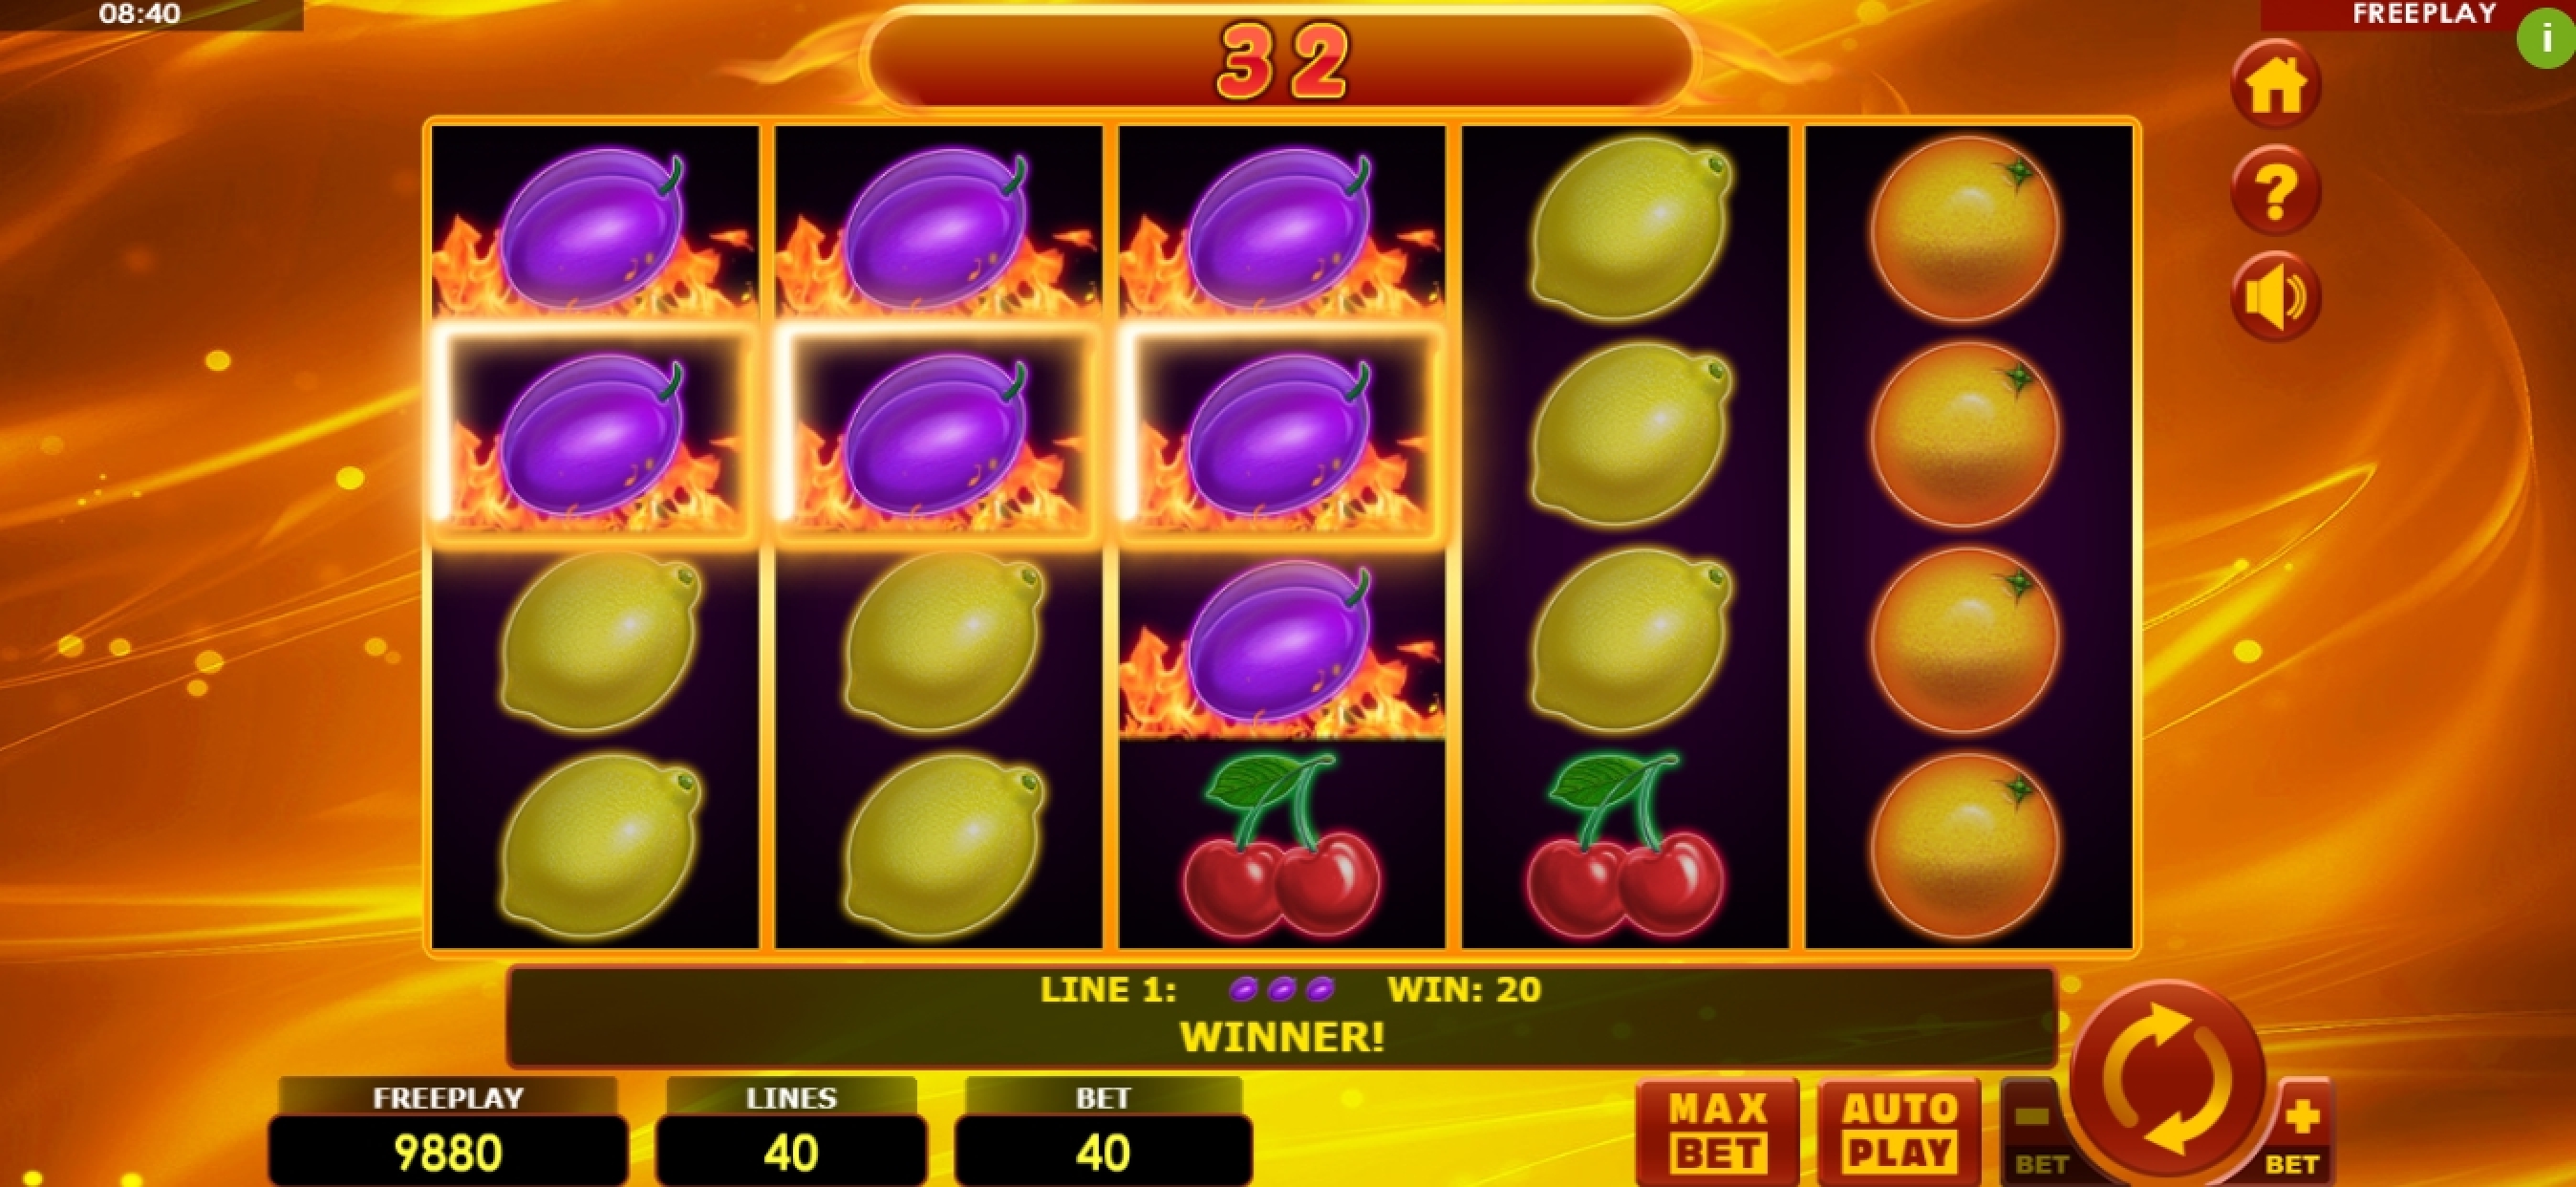 Win Money in Hottest Fruits 40 Free Slot Game by Amatic Industries